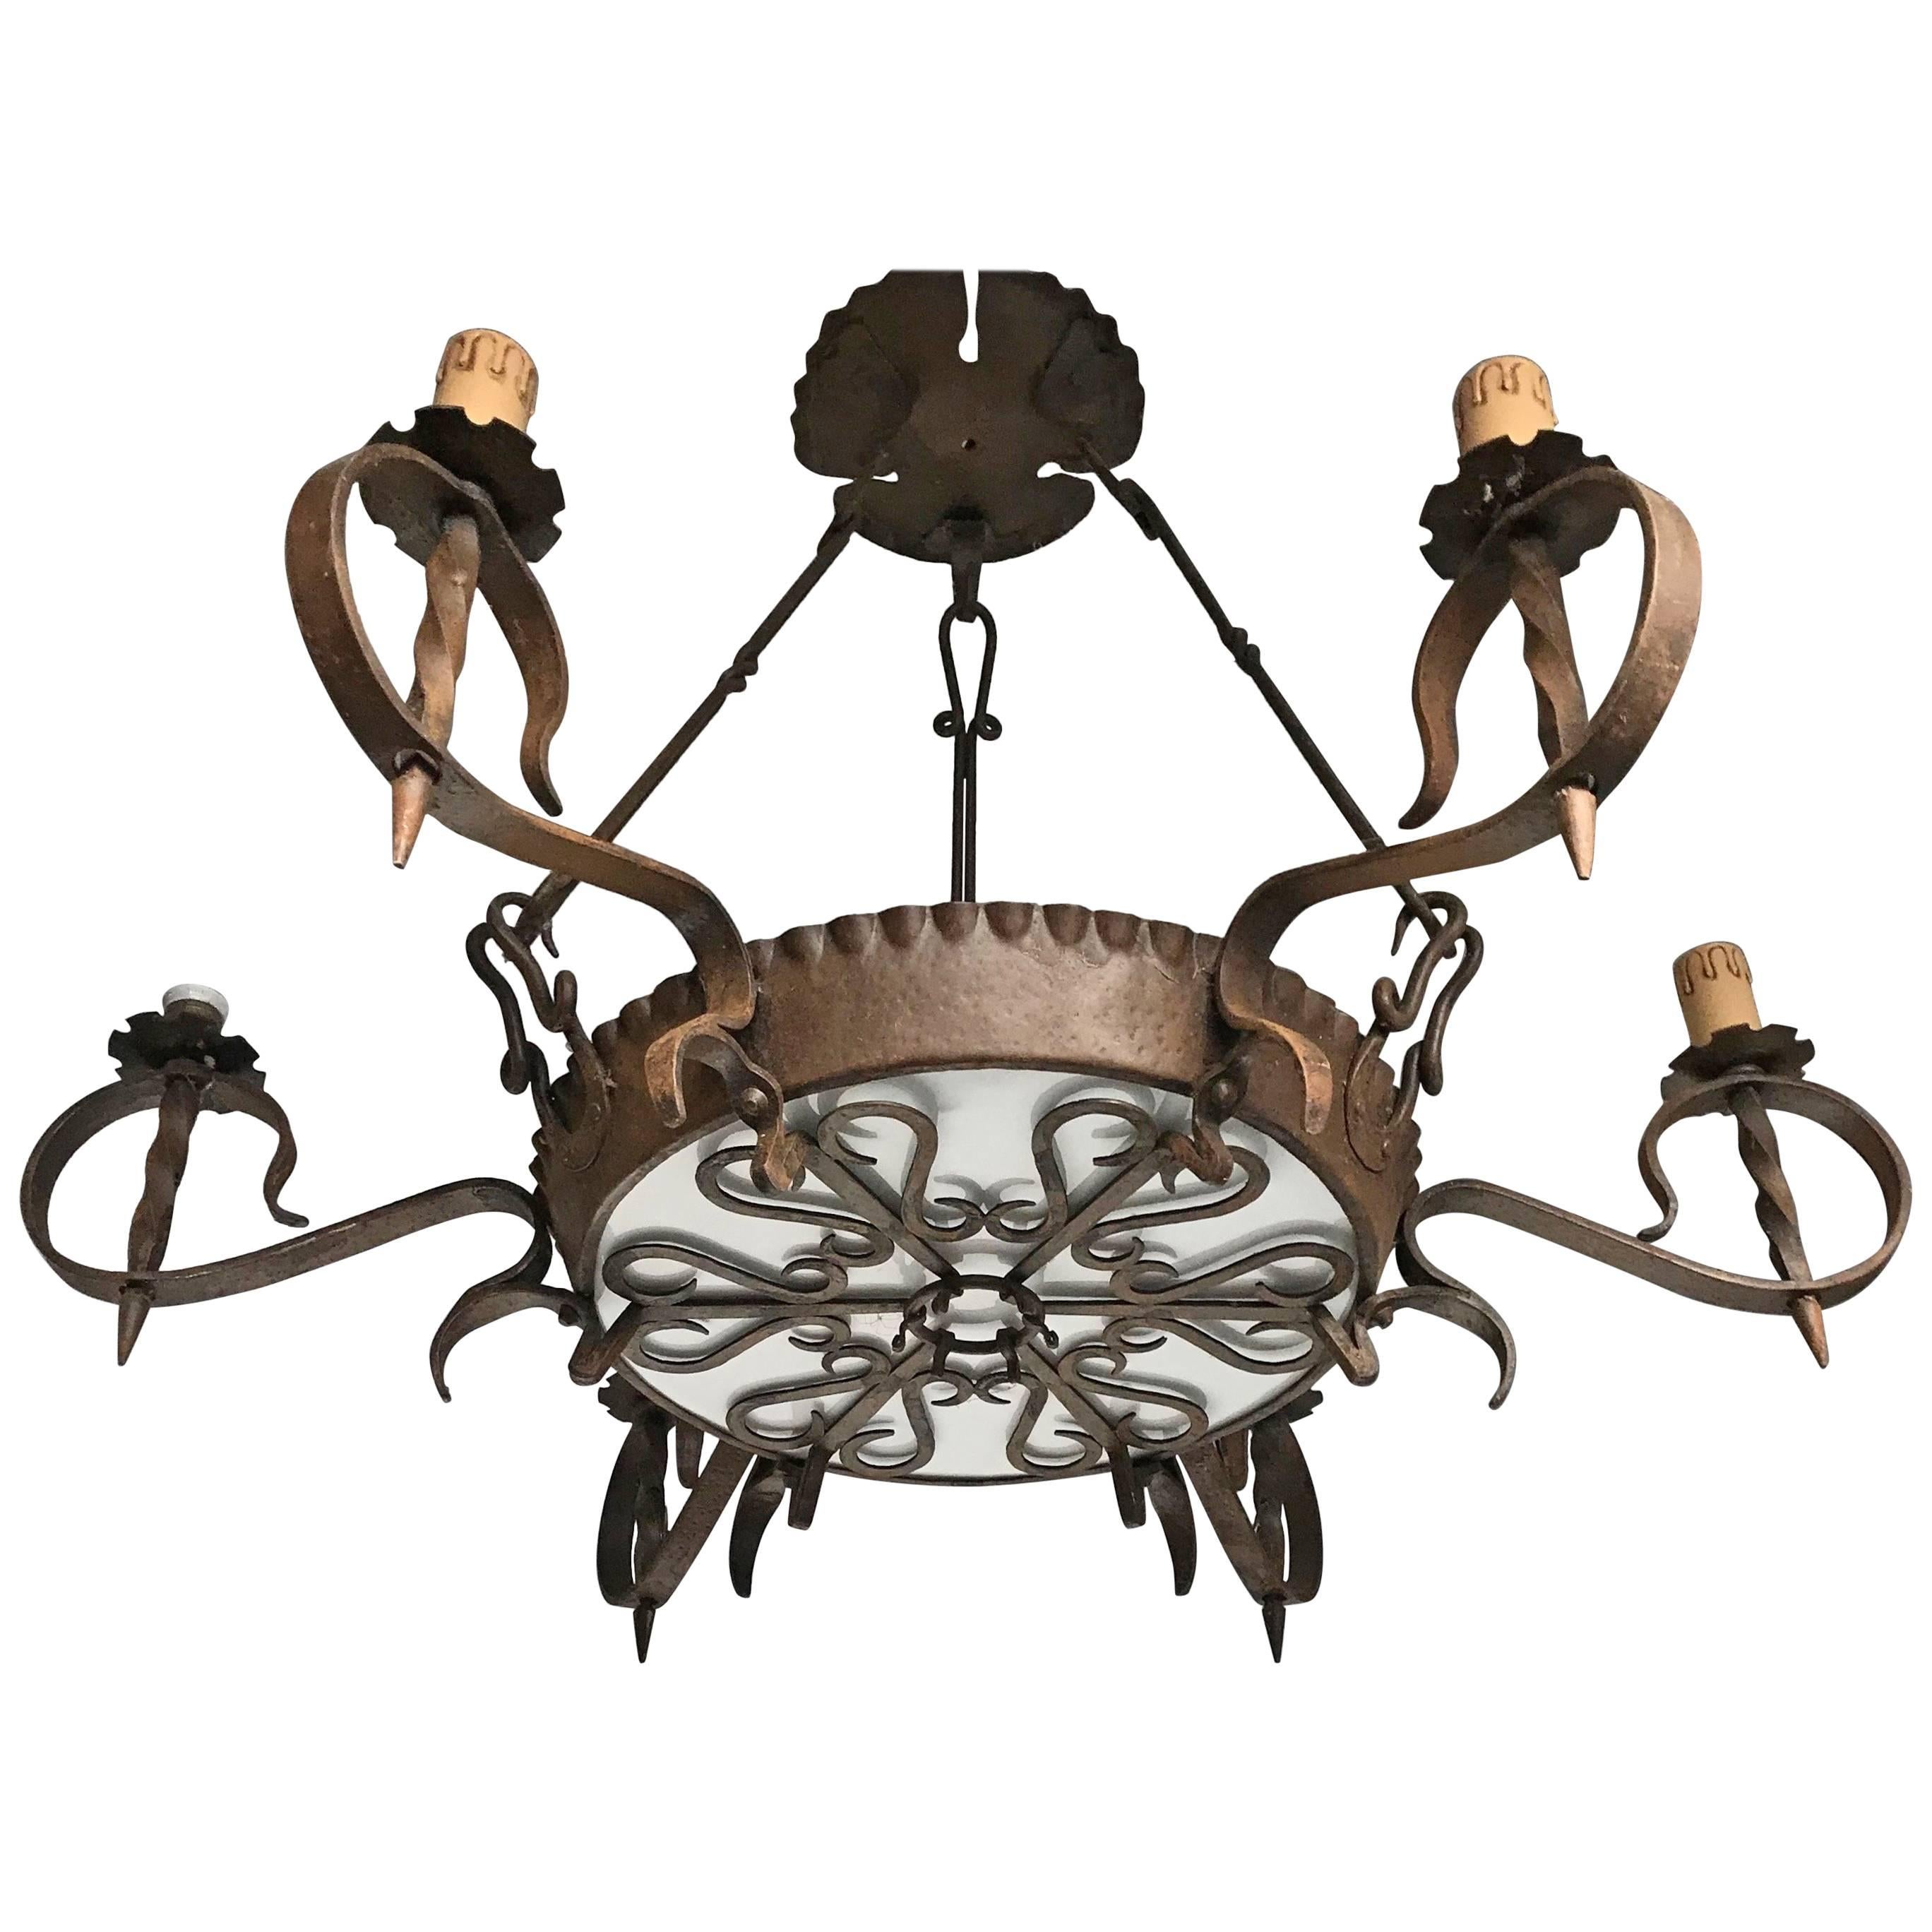 Antique Large Arts and Crafts Wrought Iron Medieval and Castle Style Chandelier